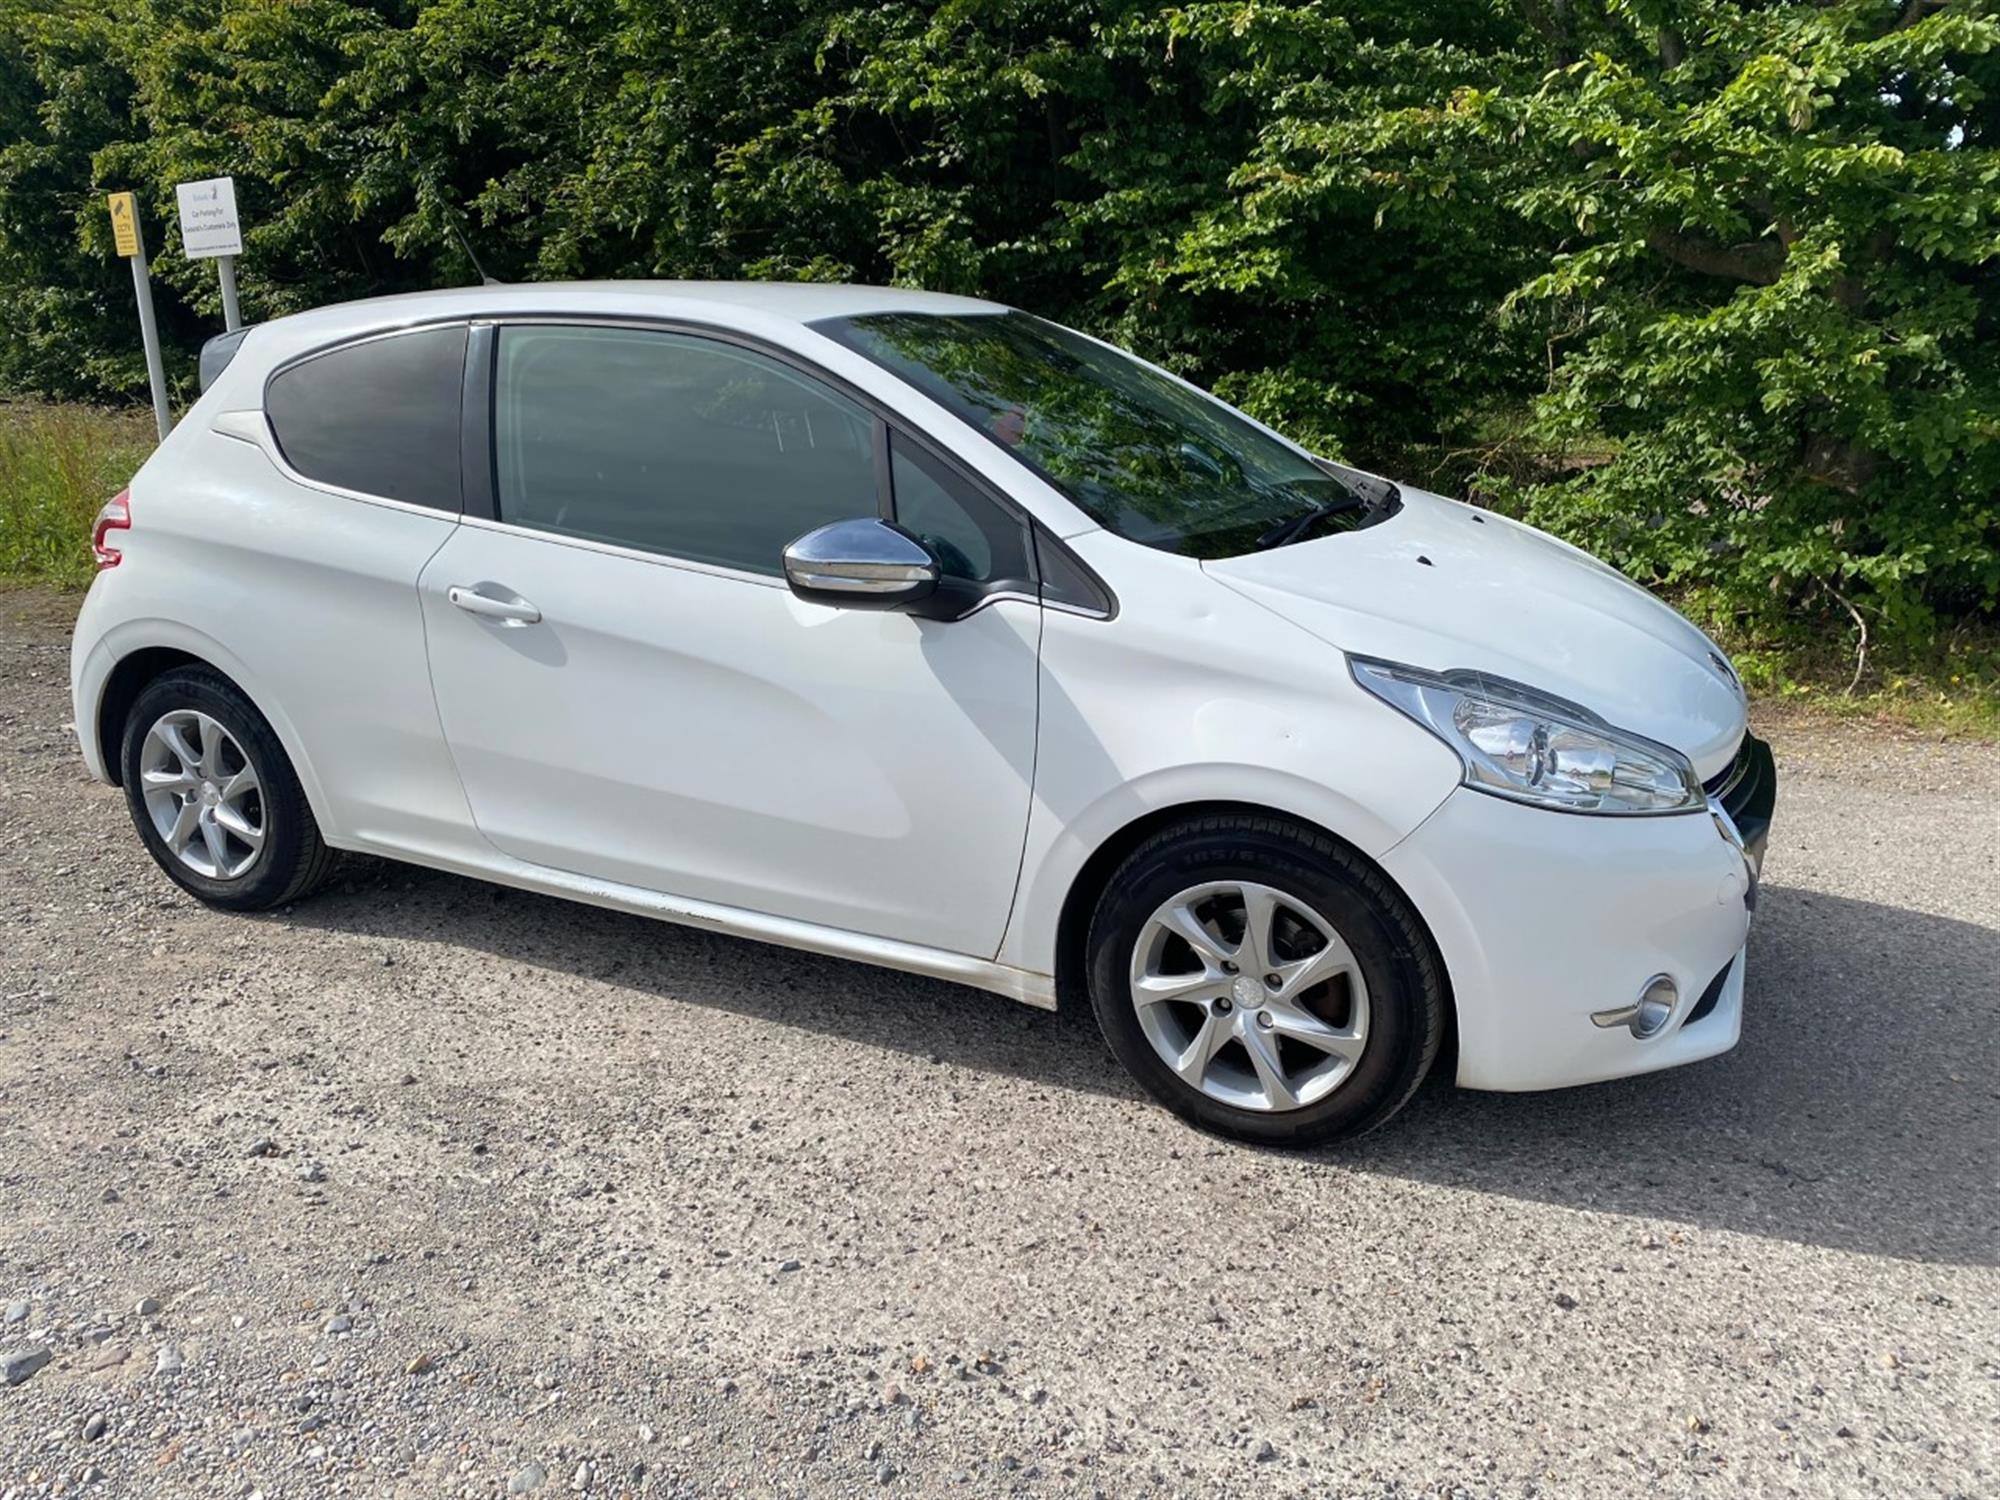 Peugeot 208 Allure 1.4 E-HDI Automatic, 111,998 miles, Only 2 owners from new, 3 door finished in - Image 3 of 7